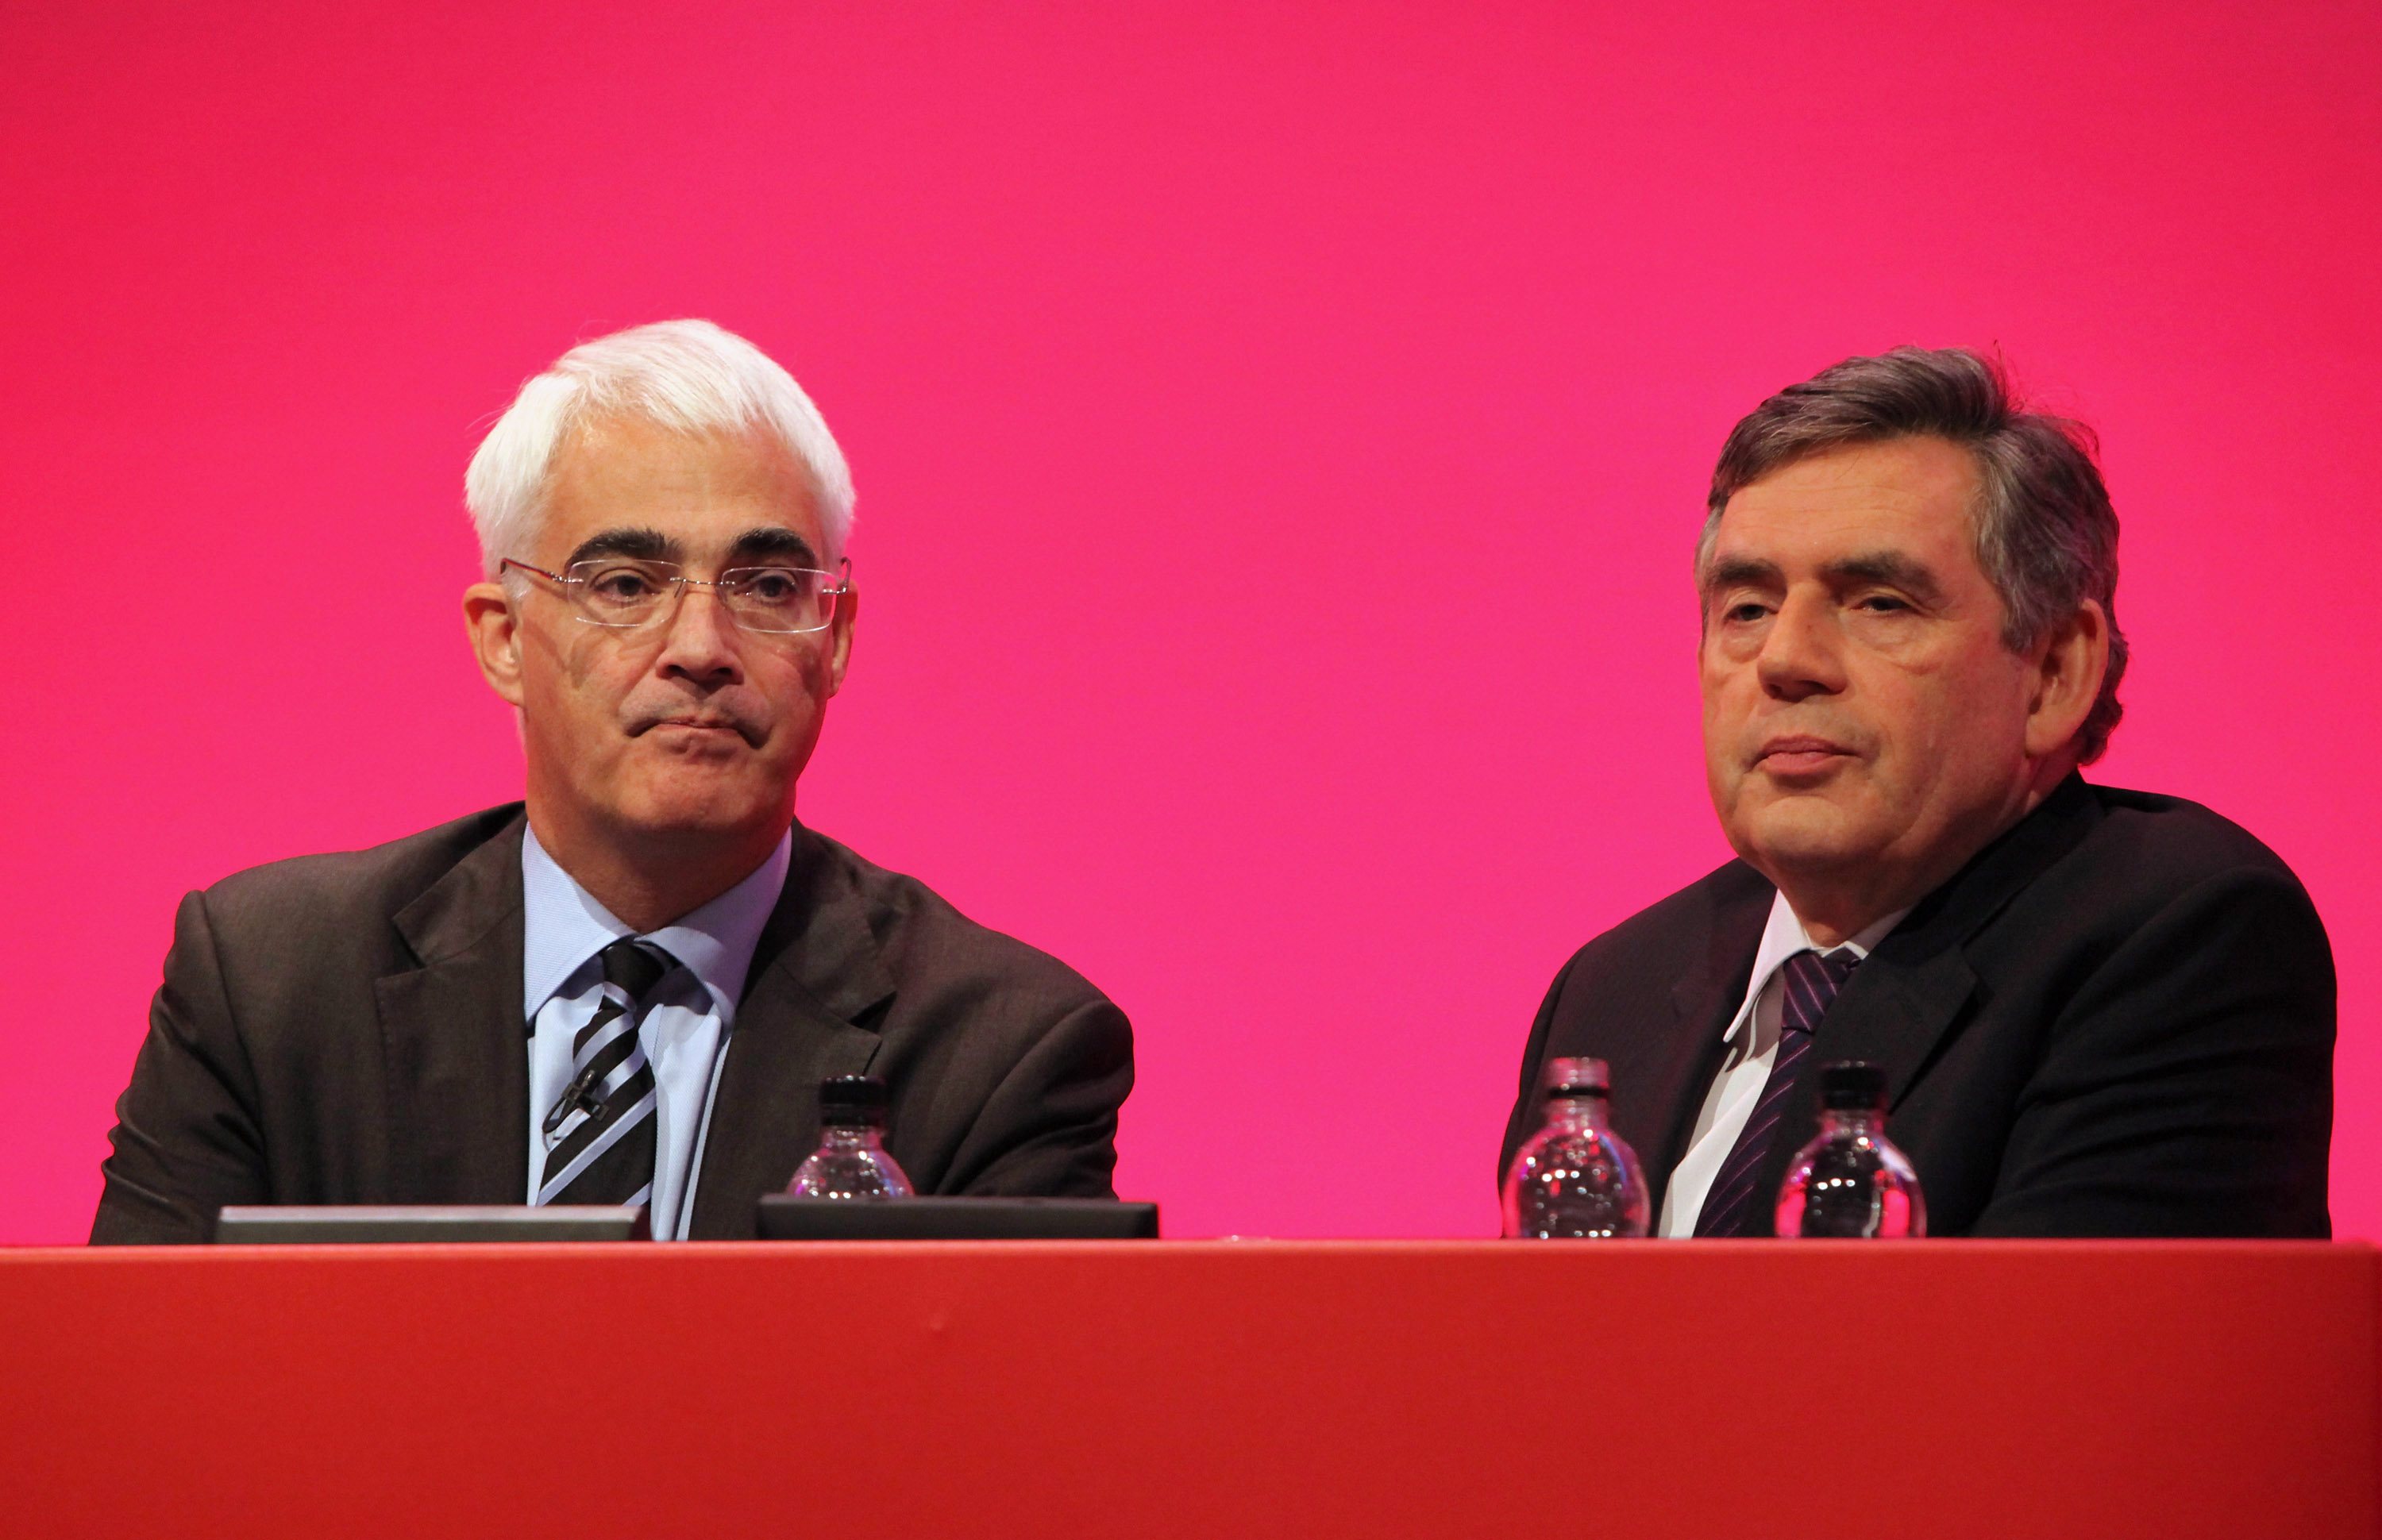 Then-Prime Minister Gordon Brown (R) next to then-Chancellor of the Exchequer Alistair Darling during the Labour Party Conference on September 28, 2009 in Brighton.